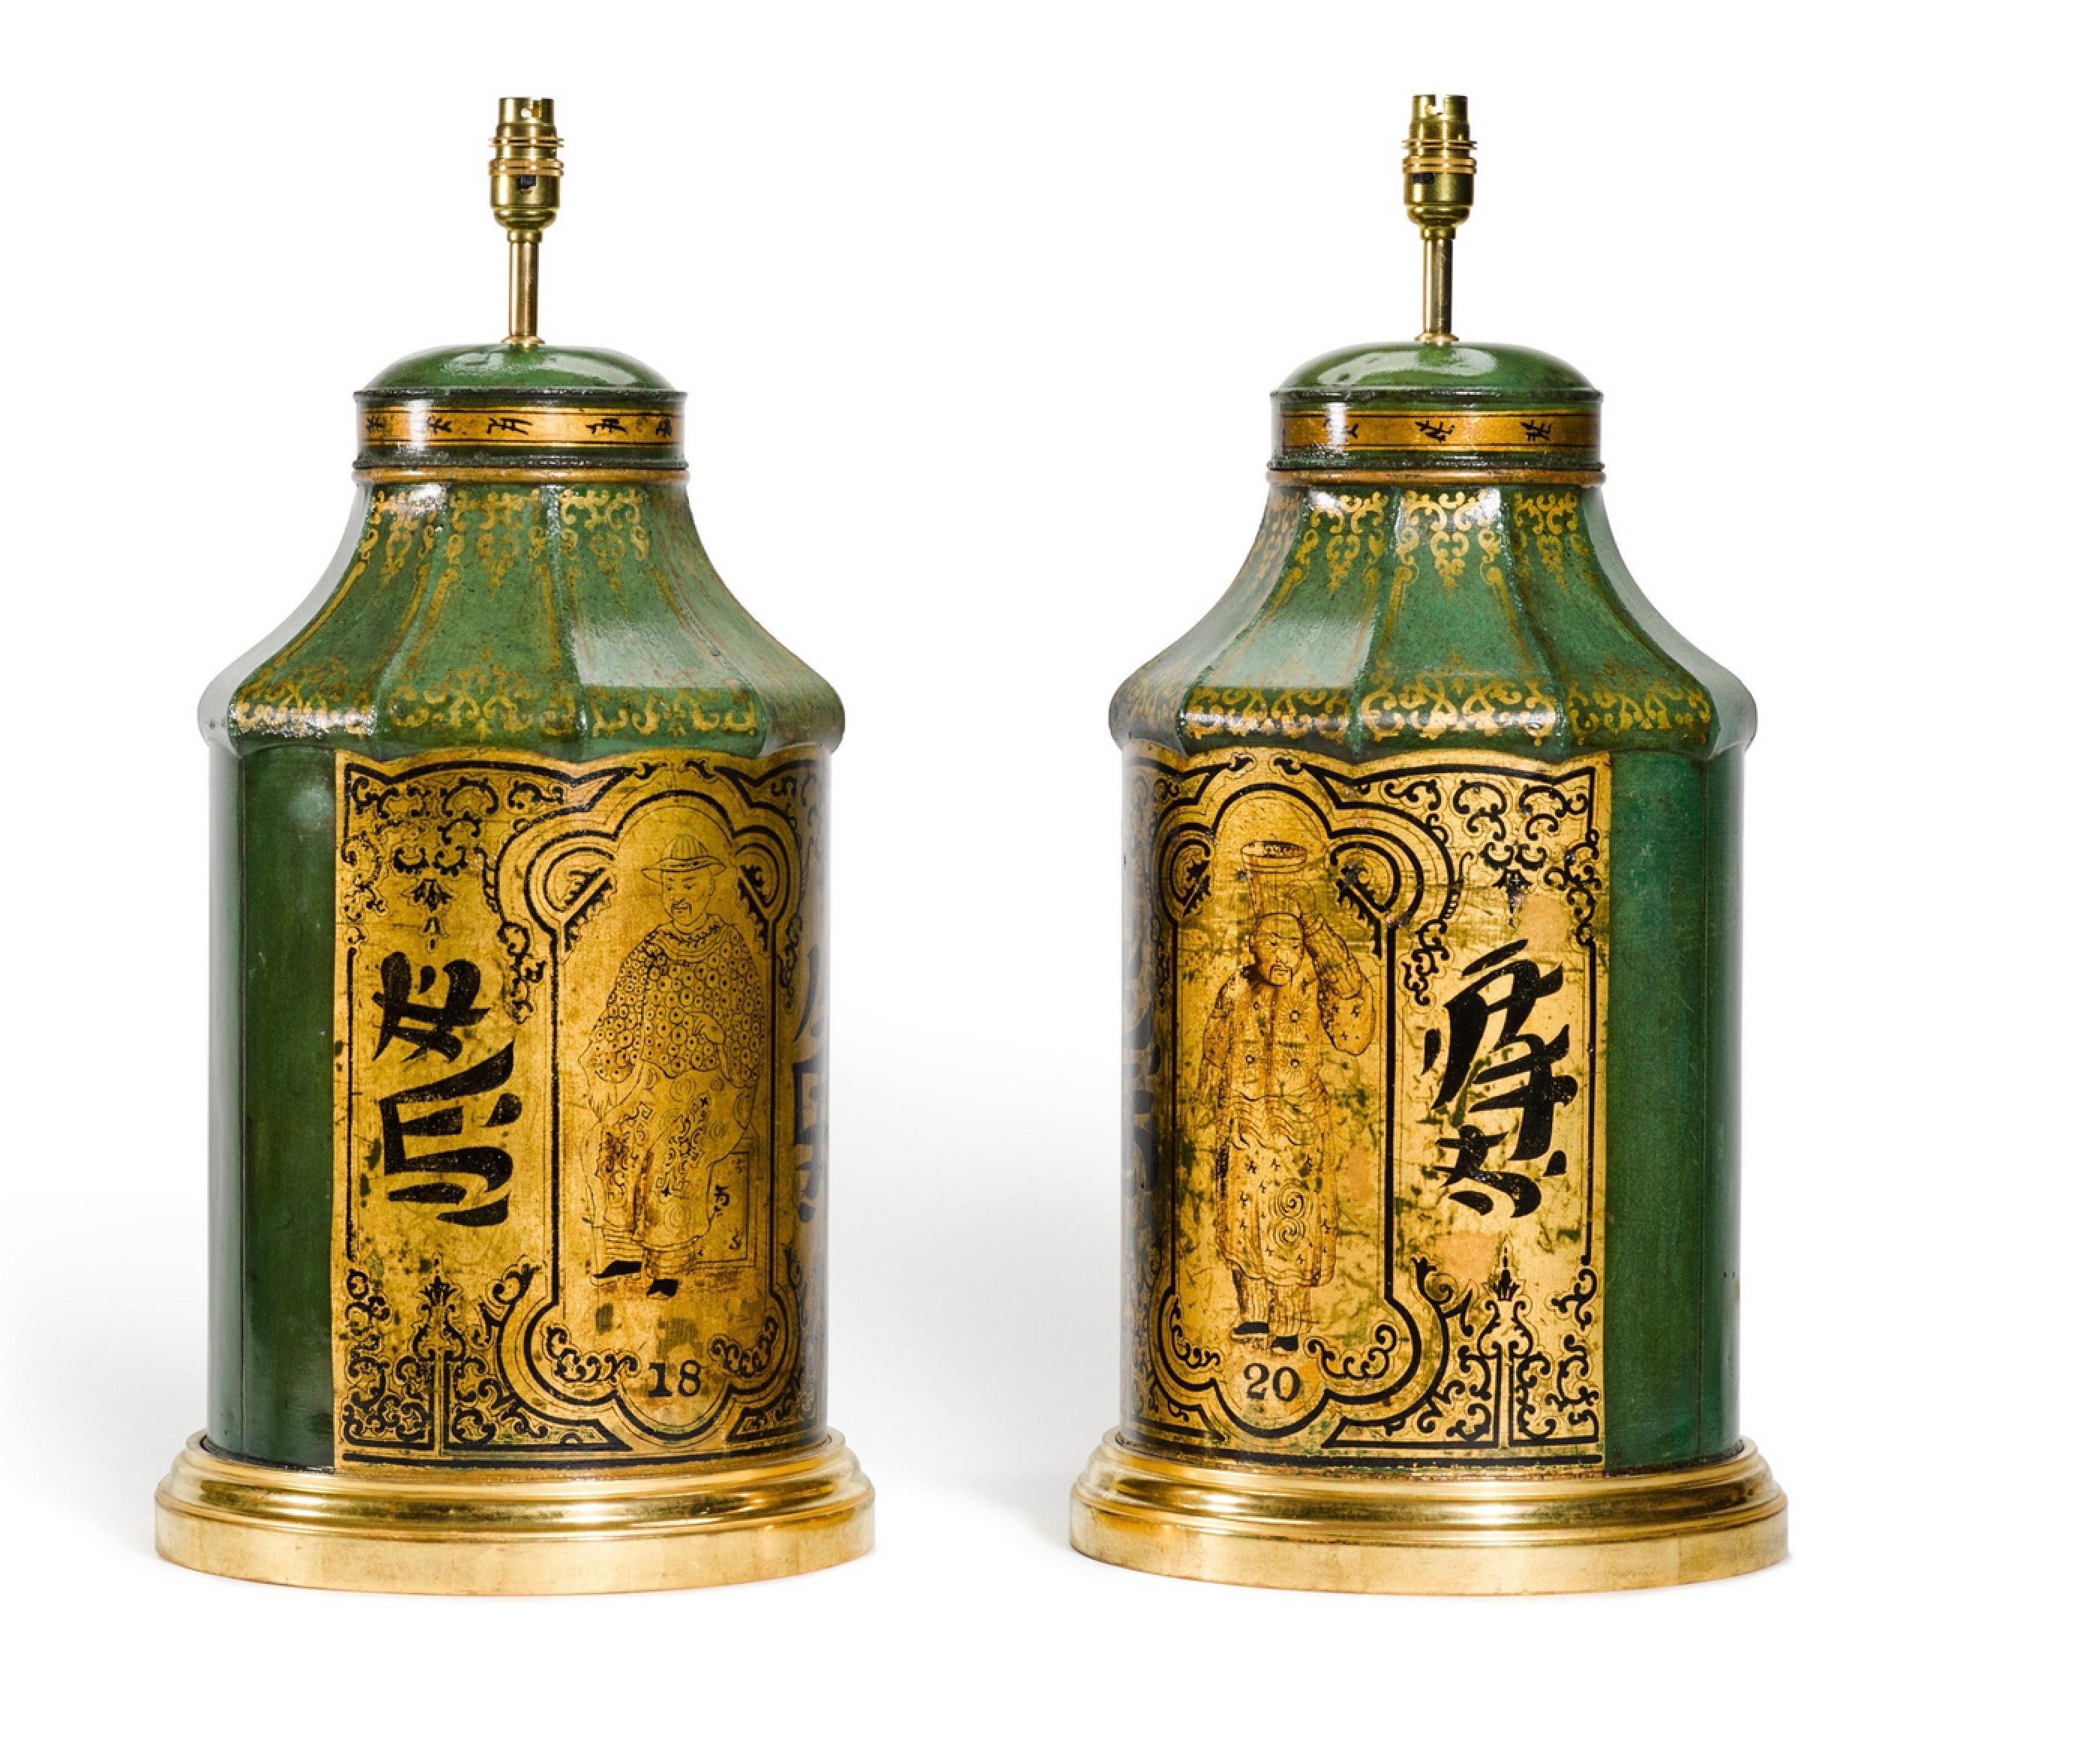 A magnificent pair of late 19th century green and gilt chinoiserie decorated tea canisters of rounded form with pagoda shaped tops, now mounted as lamps with hand gilded turned bases.

Height of vases: 19 ³/4 in (50cm) including giltwood base,